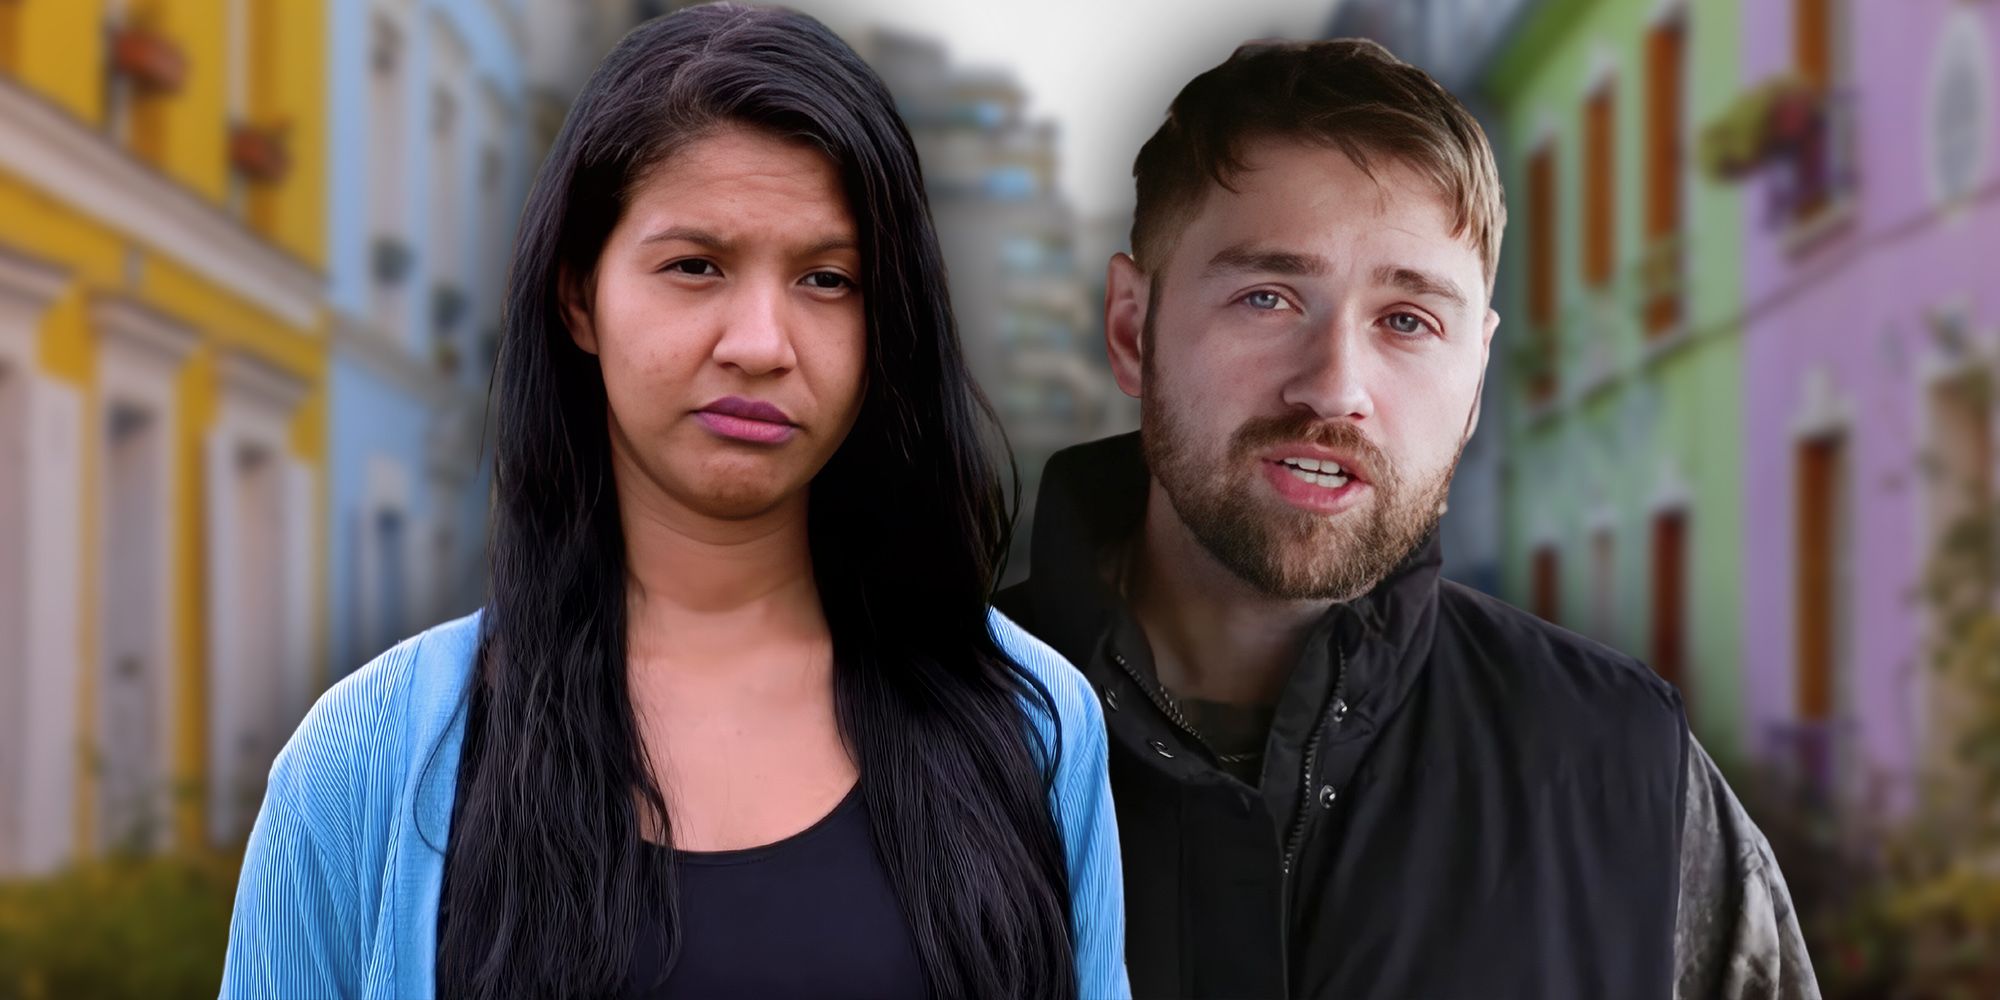 Karine and Paul from 90 Day Fiancé montage intense expressions city background